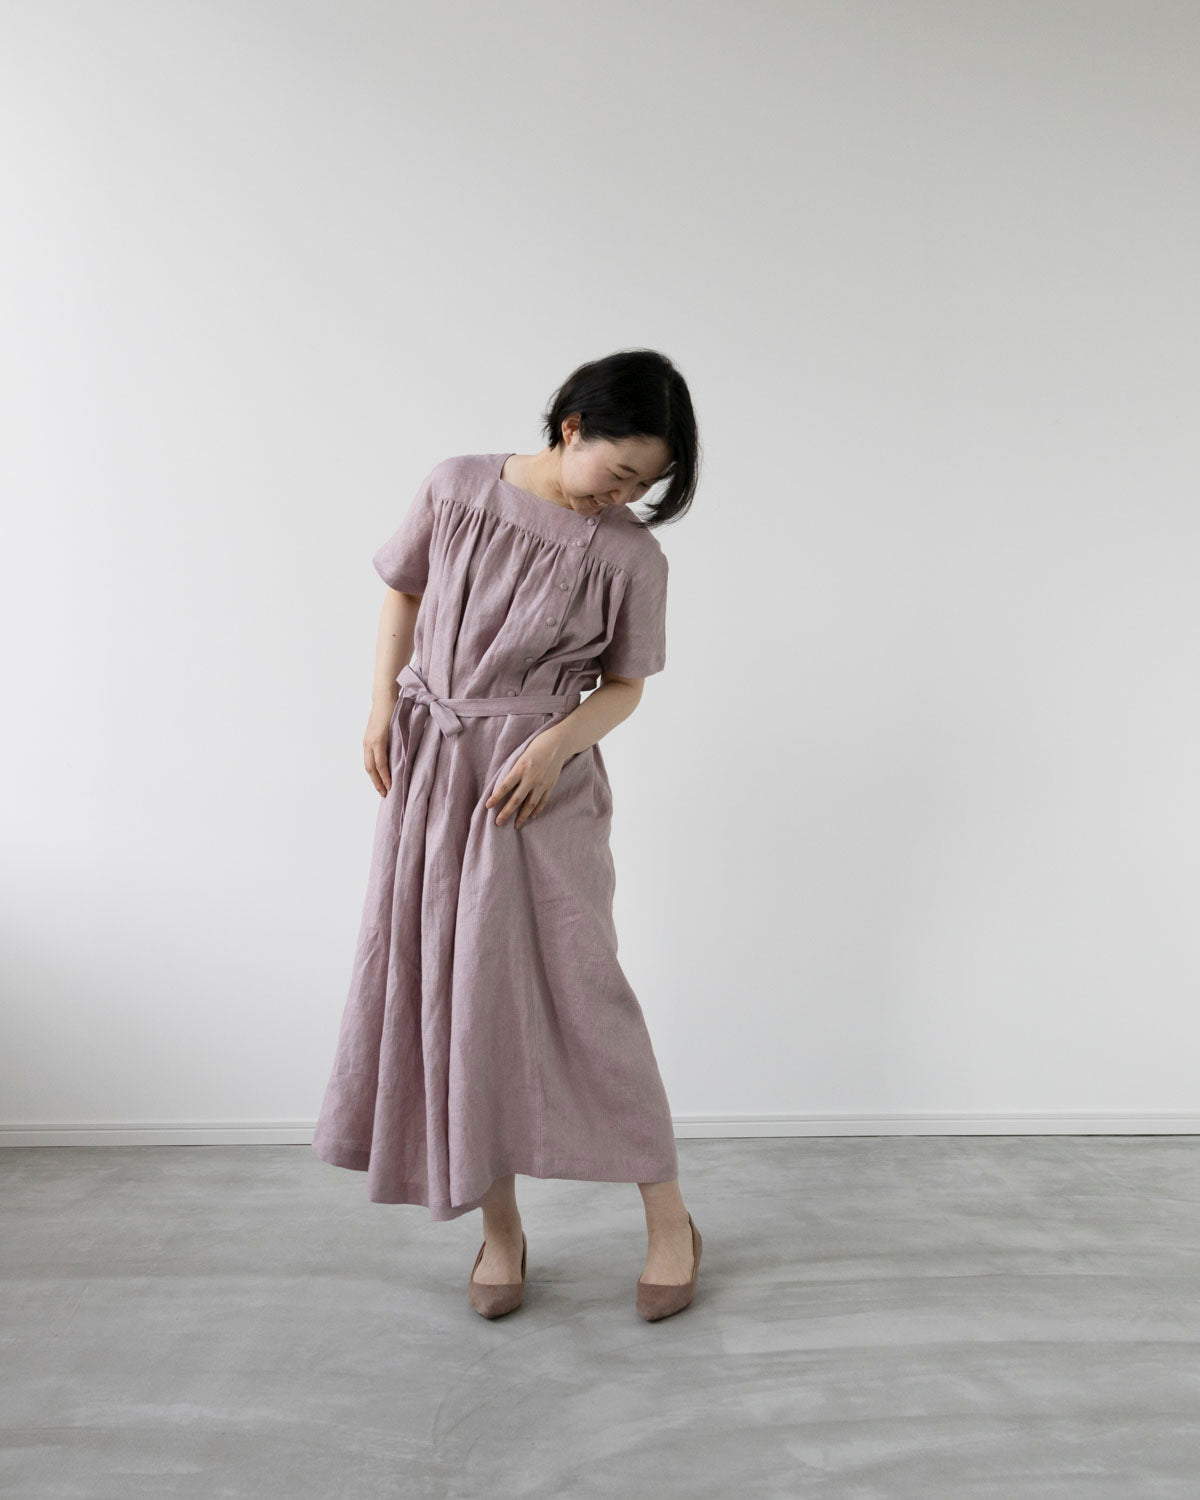 【Kit】The Omilie Onepiece - Hemp・185gsm -